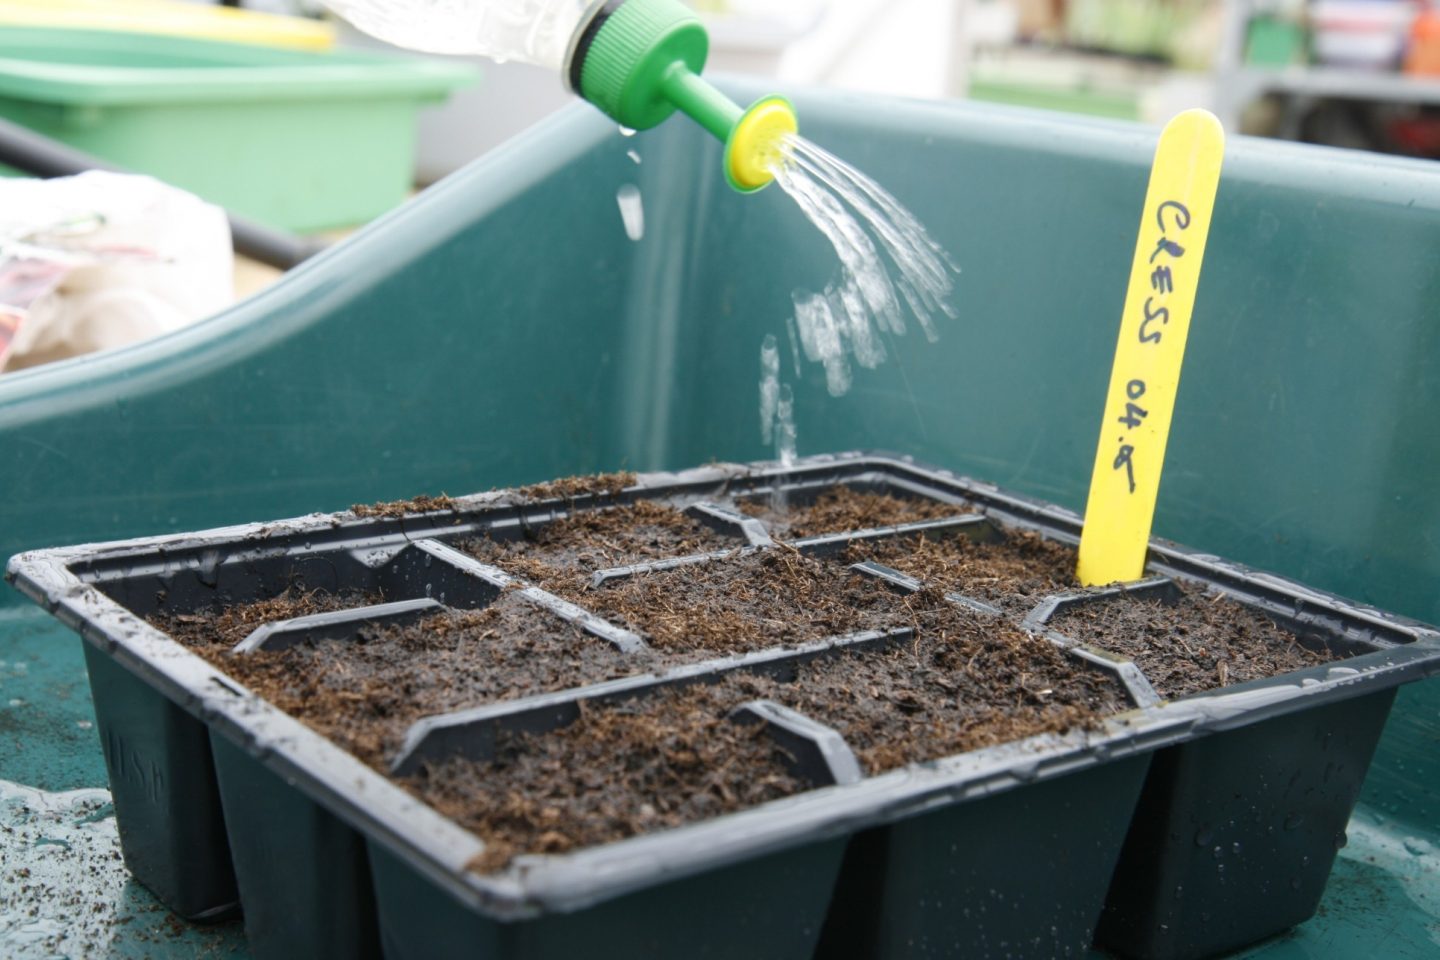 Bottle top waterer spraying water over the seed tray